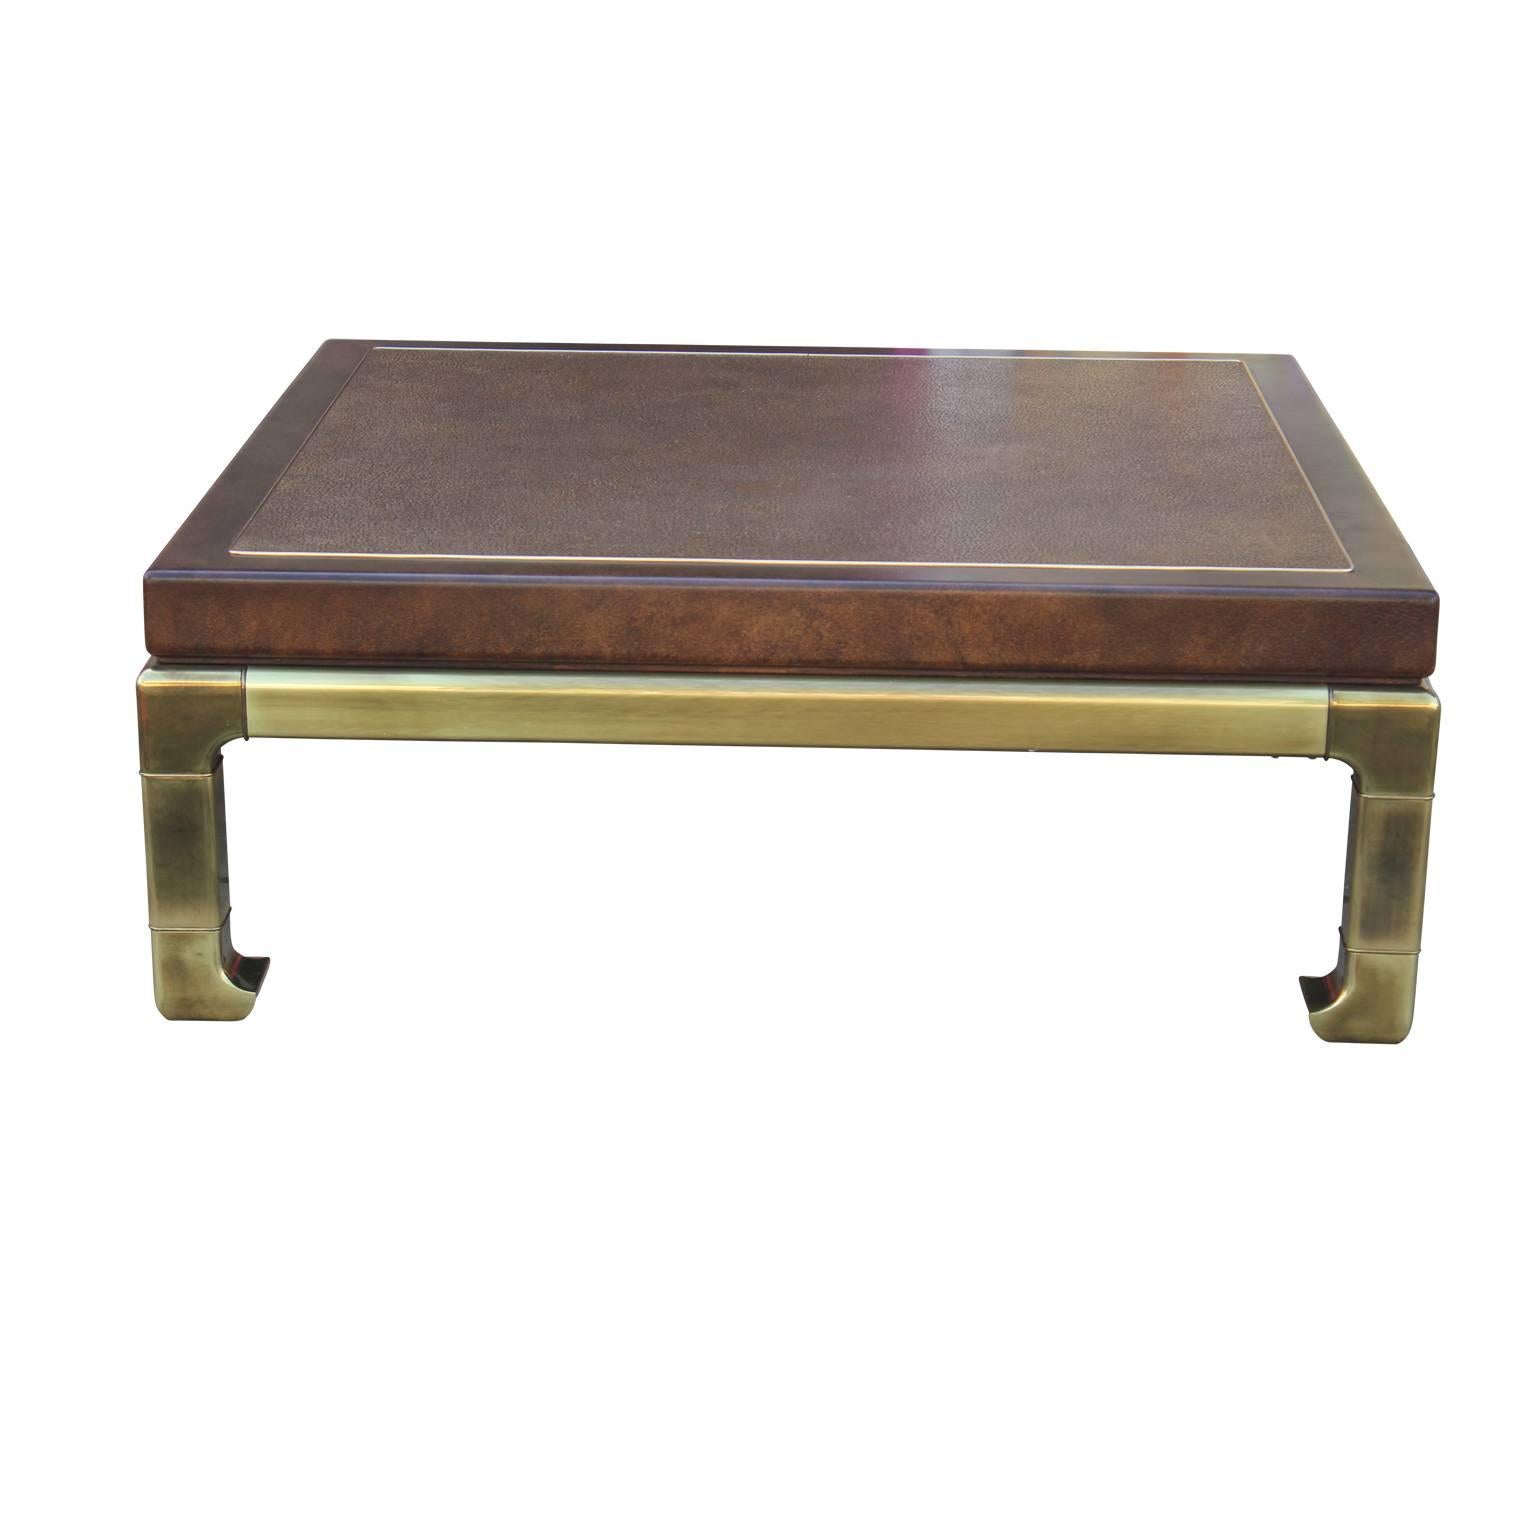 Hollywood Regency Modern Brass Coffee Table by Mastercraft with a Brown Lacquer Faux Skin Top